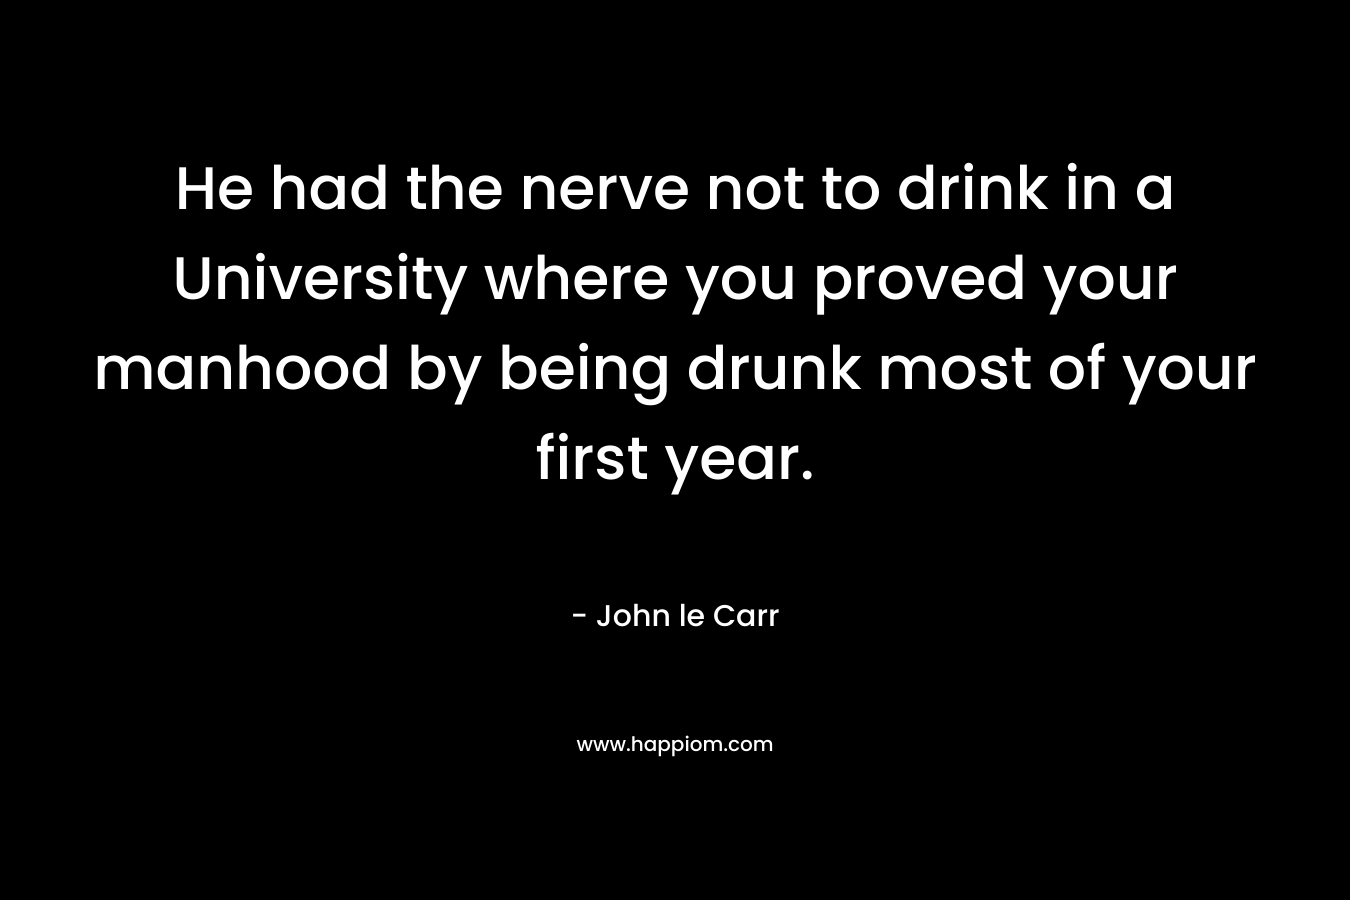 He had the nerve not to drink in a University where you proved your manhood by being drunk most of your first year. – John le Carr